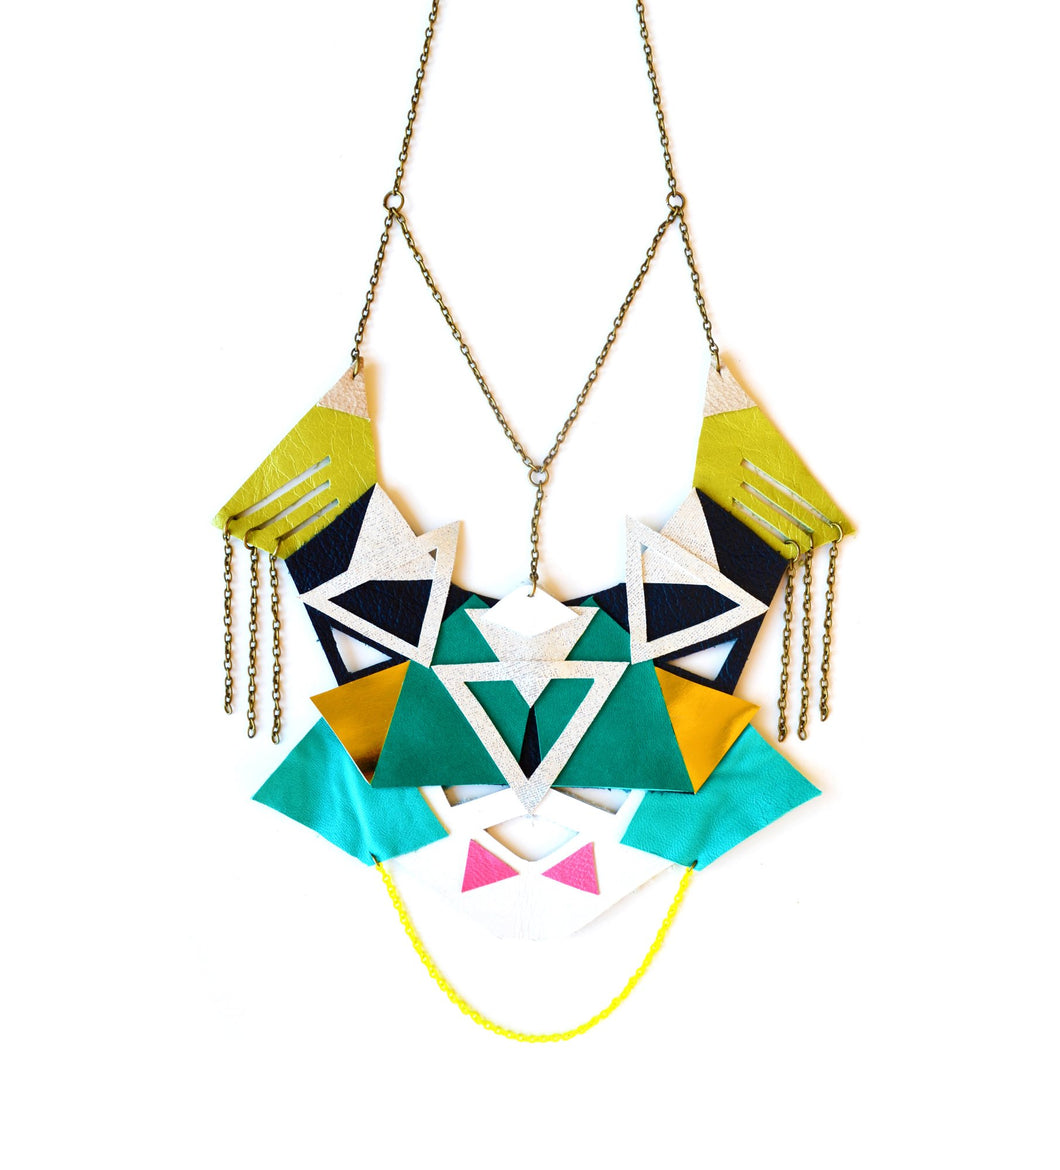 Tribal leather necklace